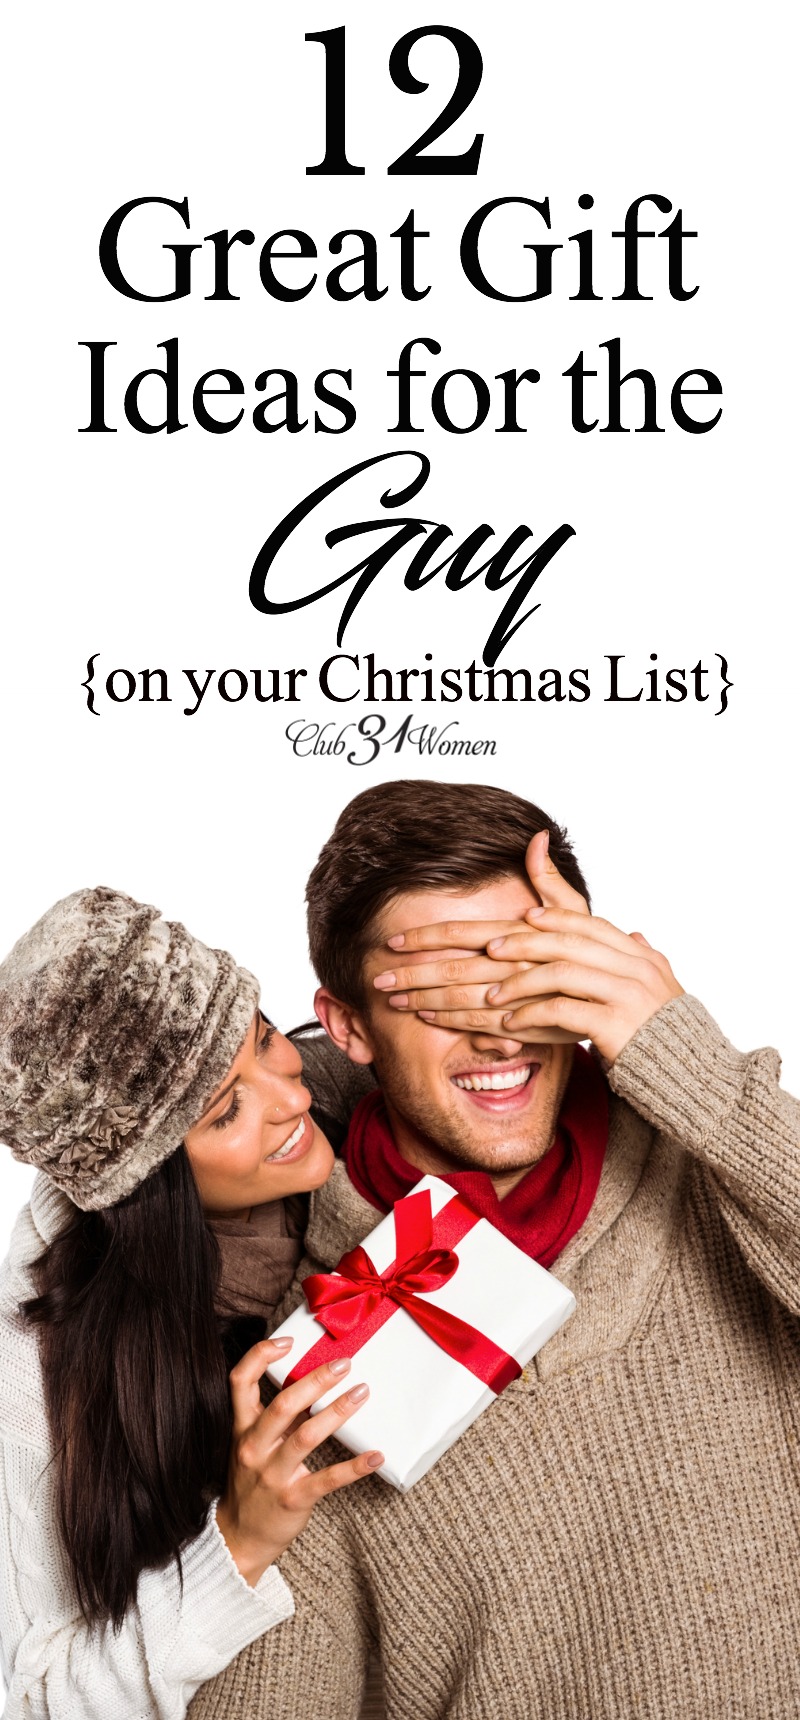 Looking for gift ideas for that guy on your Christmas list? Here's a list of 12 meaningful, practical, and affordable presents that he's sure to love! via @Club31Women